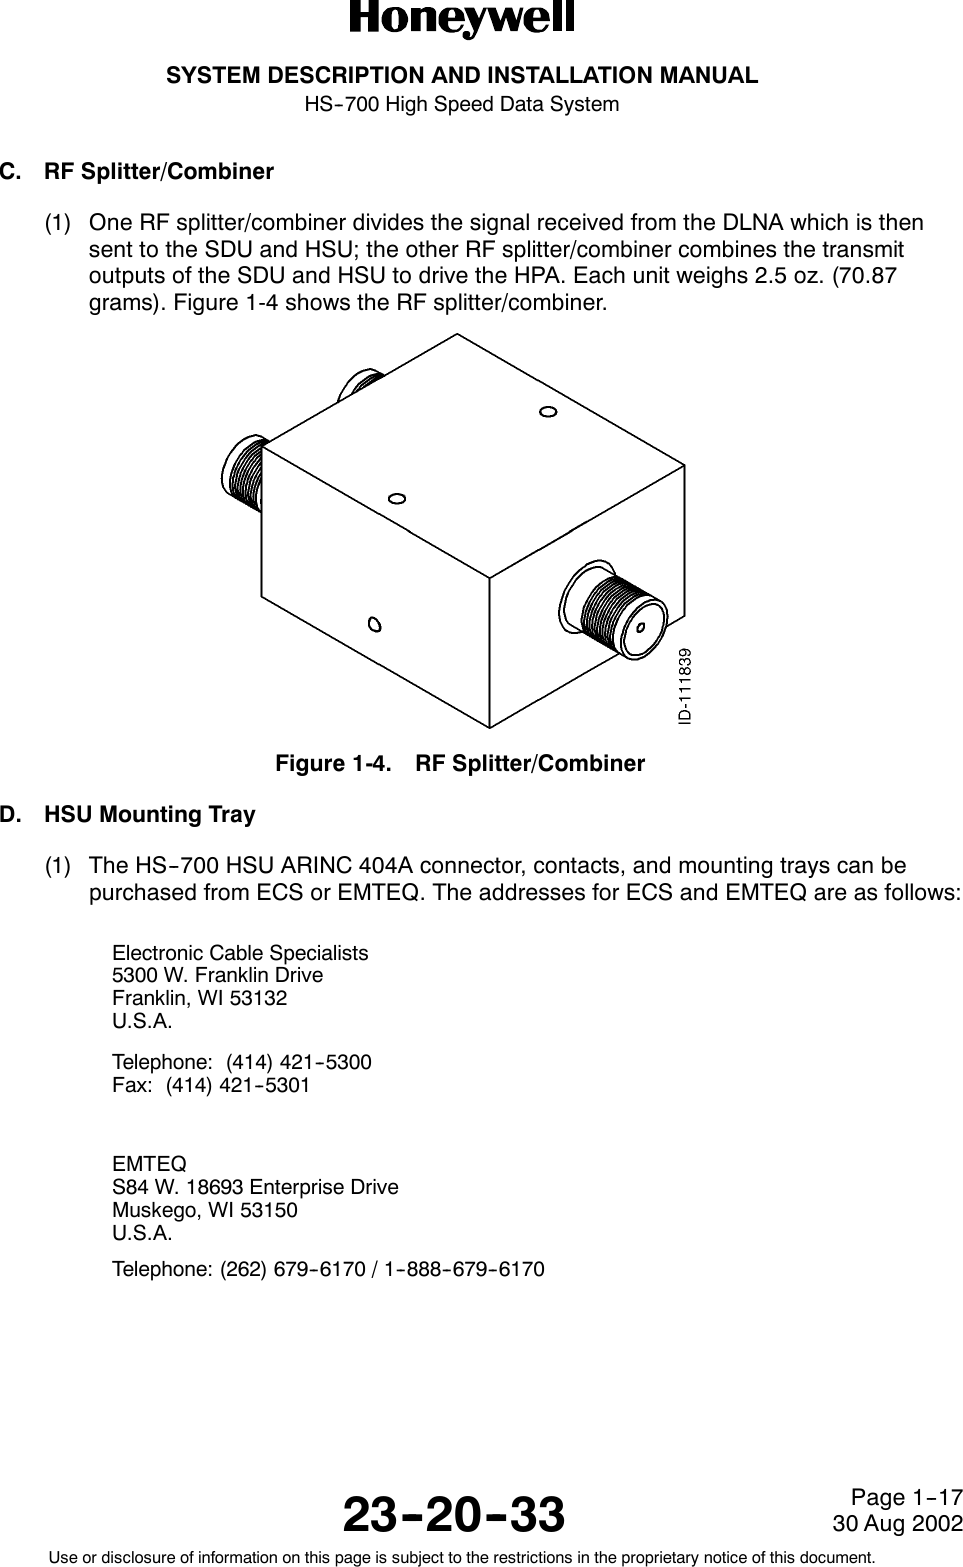 SYSTEM DESCRIPTION AND INSTALLATION MANUALHS--700 High Speed Data System23--20--3330 Aug 2002Use or disclosure of information on this page is subject to the restrictions in the proprietary notice of this document.Page 1--17C. RF Splitter/Combiner(1) One RF splitter/combiner divides the signal received from the DLNA which is thensent to the SDU and HSU; the other RF splitter/combiner combines the transmitoutputs of the SDU and HSU to drive the HPA. Each unit weighs 2.5 oz. (70.87grams). Figure 1-4 shows the RF splitter/combiner.Figure 1-4. RF Splitter/CombinerD. HSU Mounting Tray(1) The HS--700 HSU ARINC 404A connector, contacts, and mounting trays can bepurchased from ECS or EMTEQ. The addresses for ECS and EMTEQ are as follows:Electronic Cable Specialists5300 W. Franklin DriveFranklin, WI 53132U.S.A.Telephone: (414) 421--5300Fax: (414) 421--5301EMTEQS84 W. 18693 Enterprise DriveMuskego, WI 53150U.S.A.Telephone: (262) 679--6170 / 1--888--679--6170